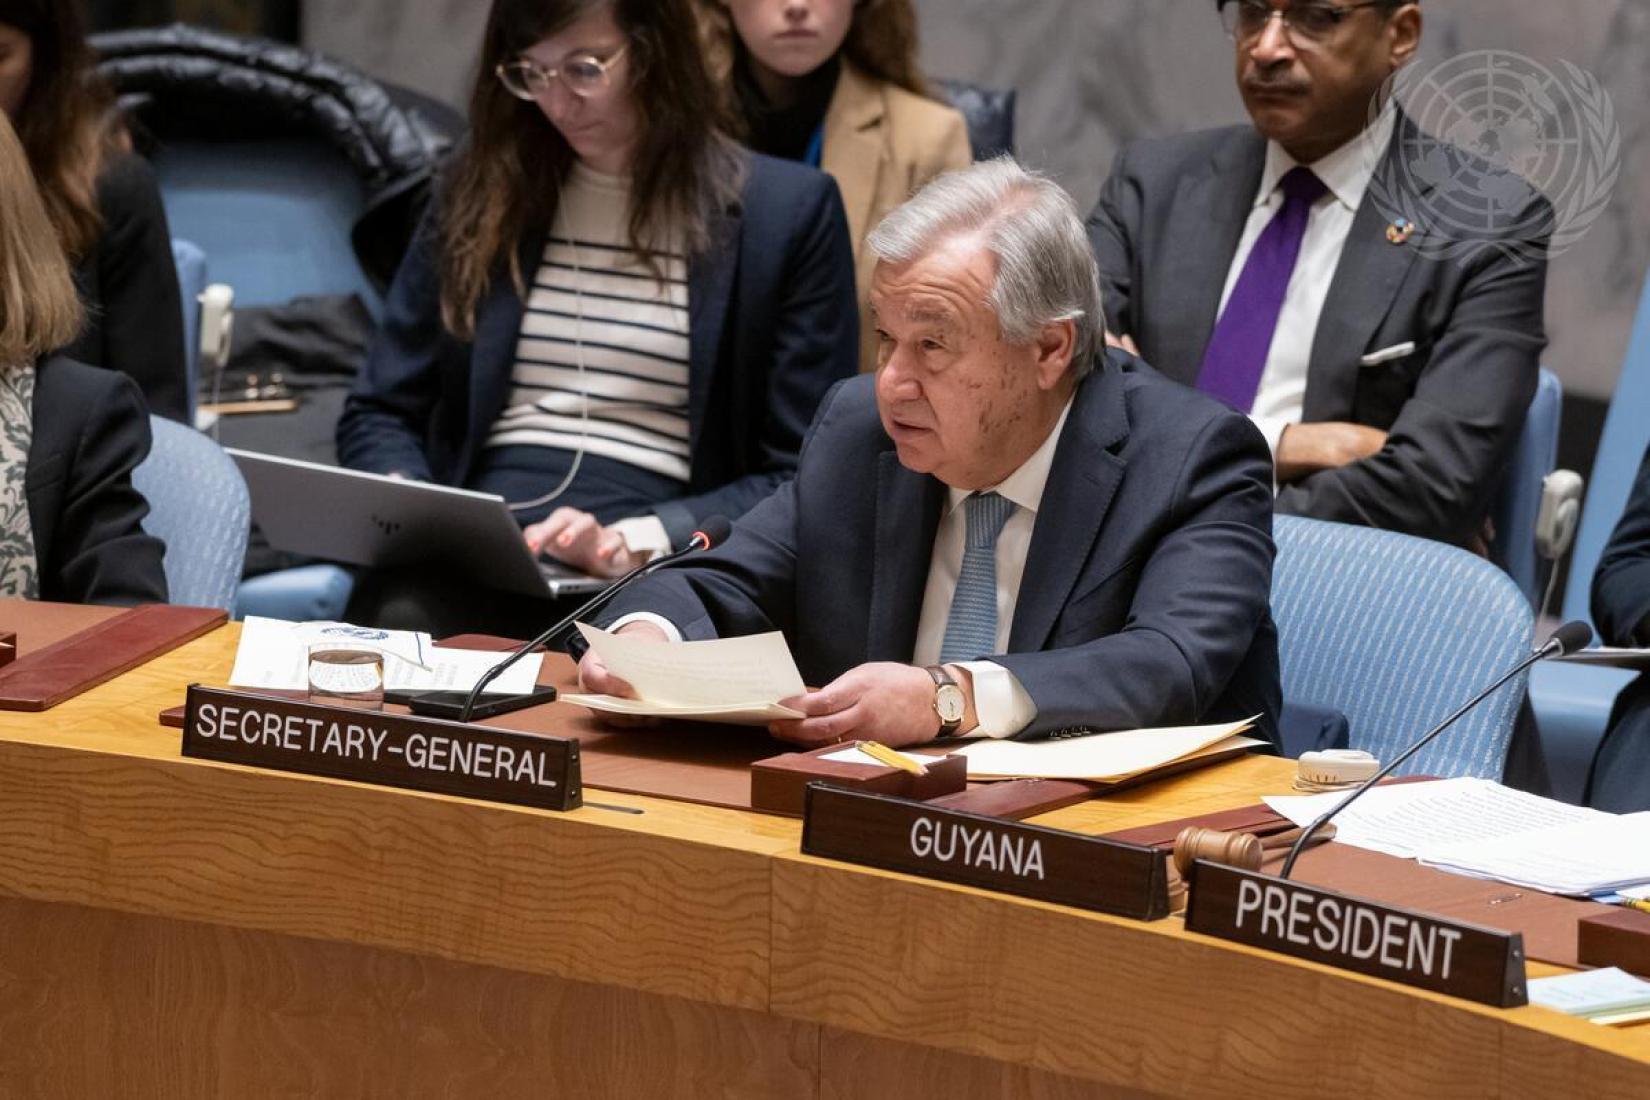 UN Security Council Meets on Climate Change and Food Insecurity